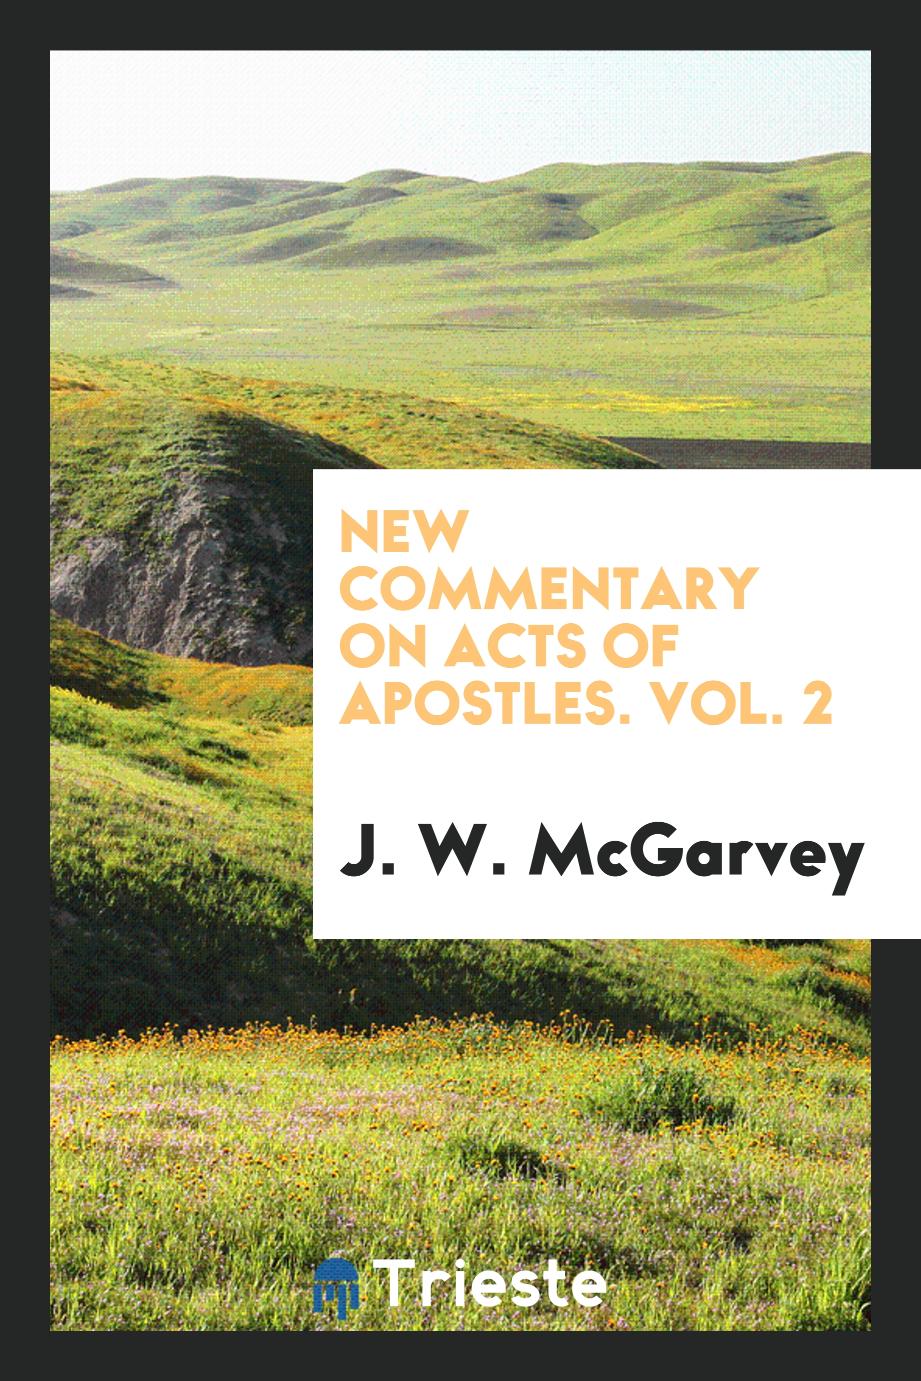 New Commentary on Acts of Apostles. Vol. 2